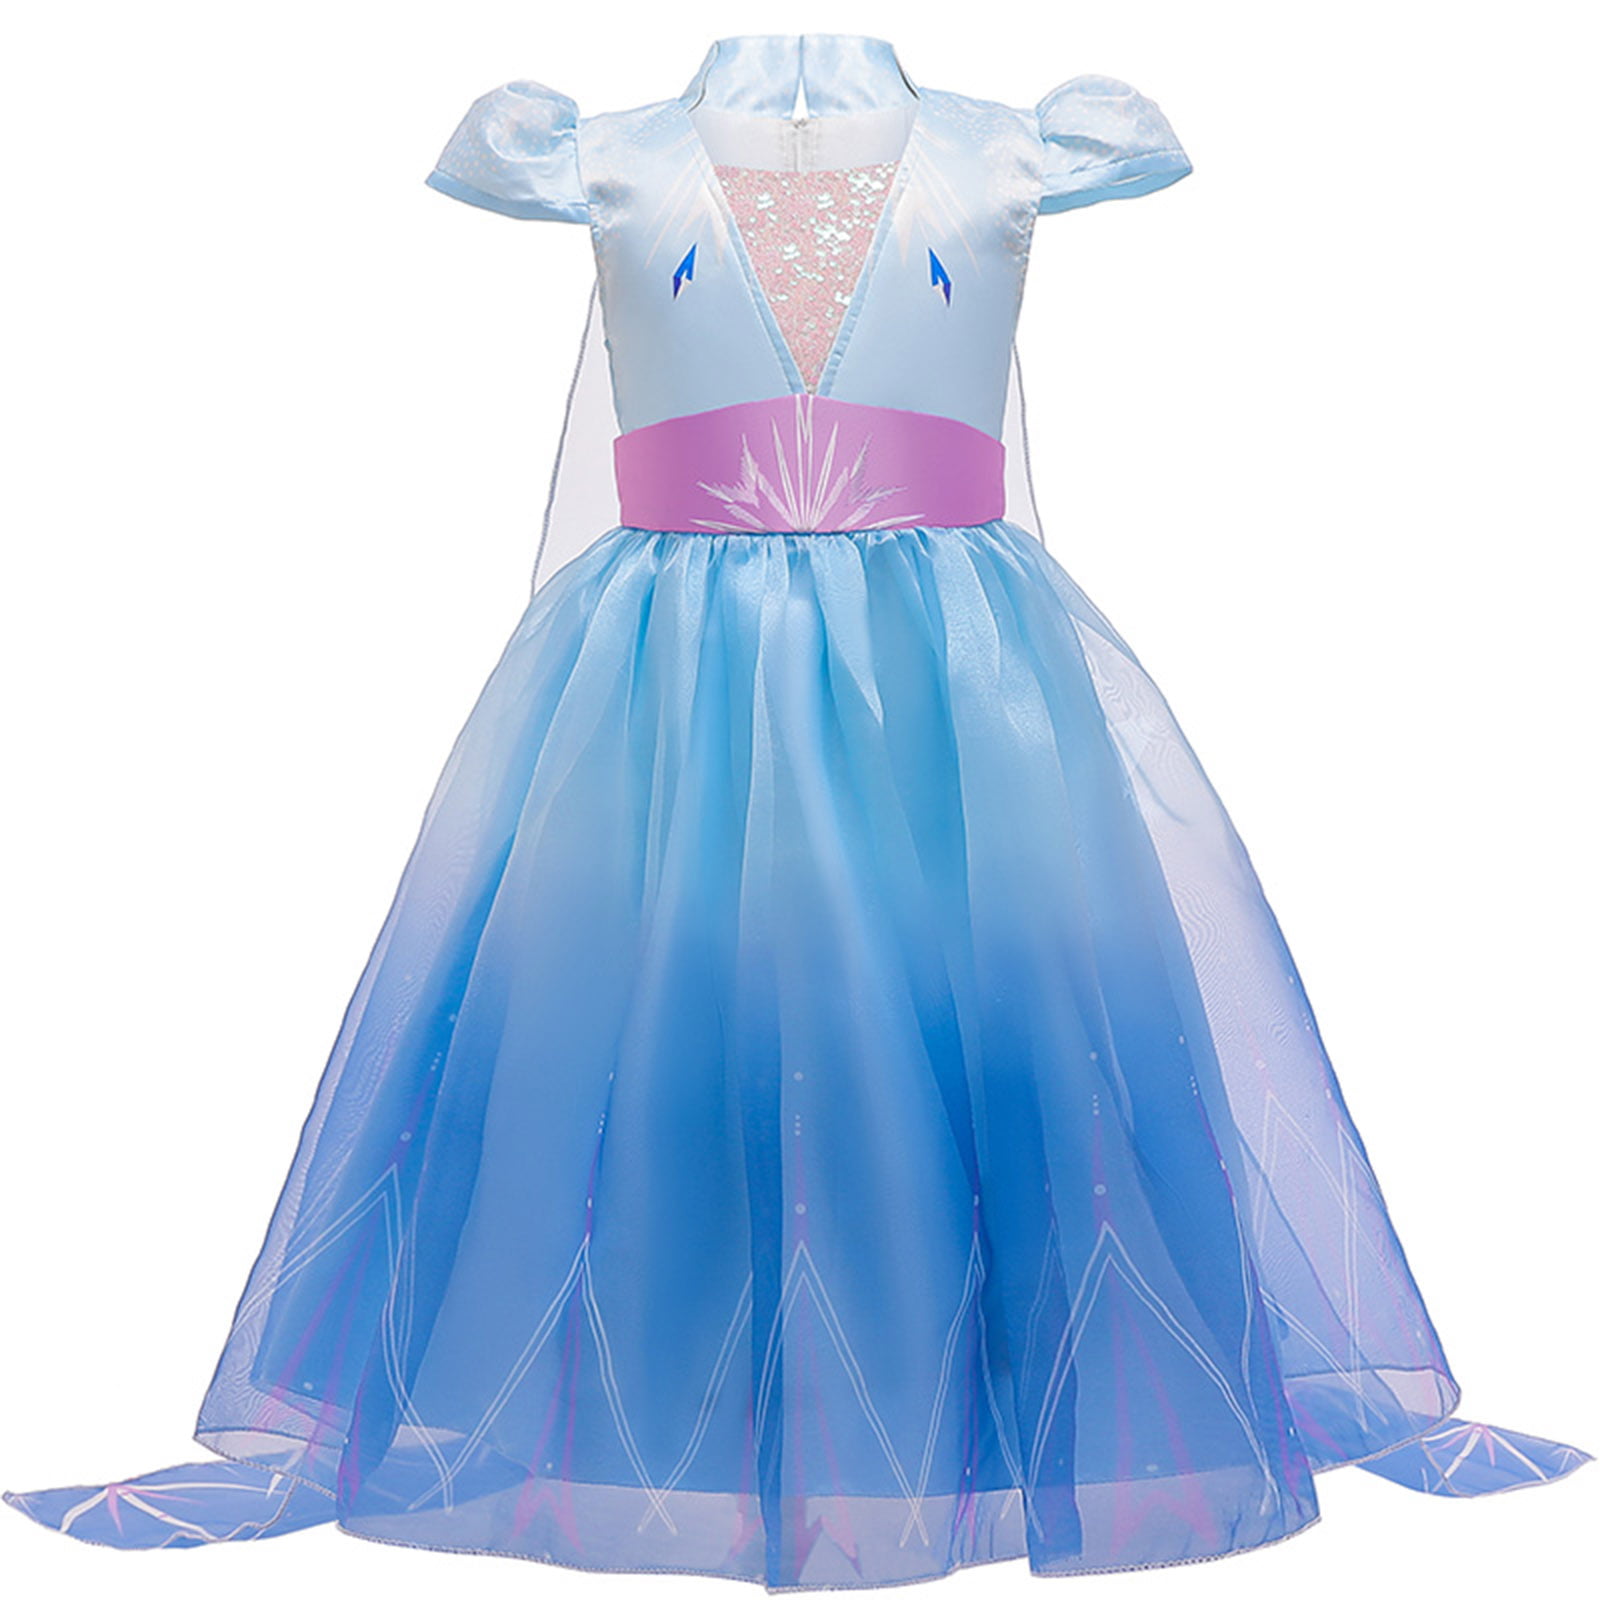 Fishkidtail Princess Costume Dress for Girls Princess Dress Snow Queen Party Birthday Clothes for Toddler